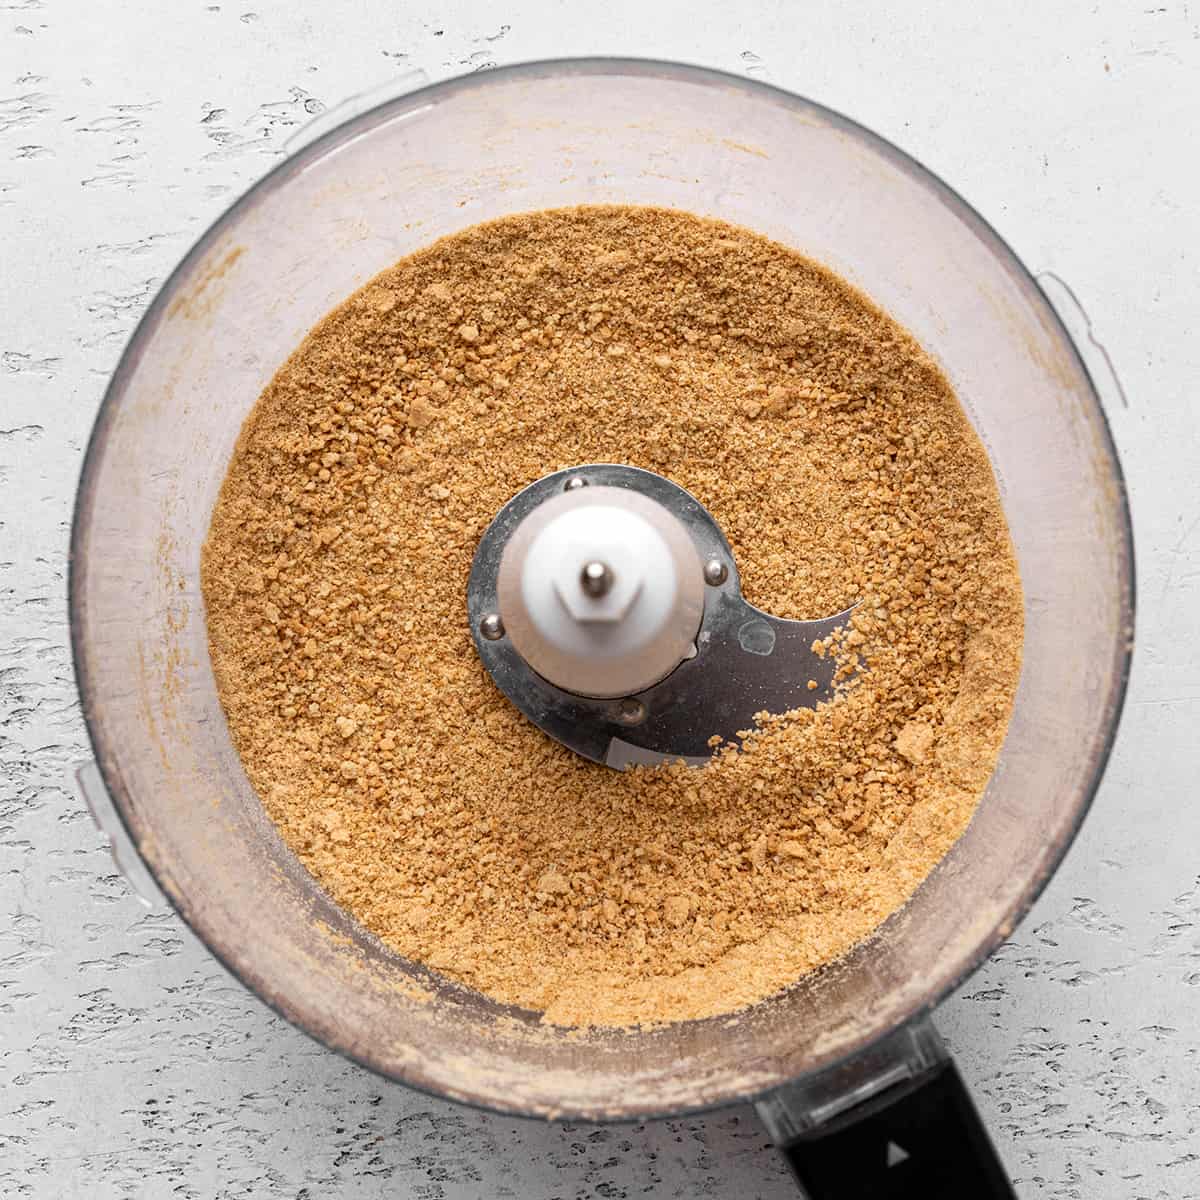 graham cracker crumbs in a food processor to make the crust for this No Bake Cheesecake Recipe